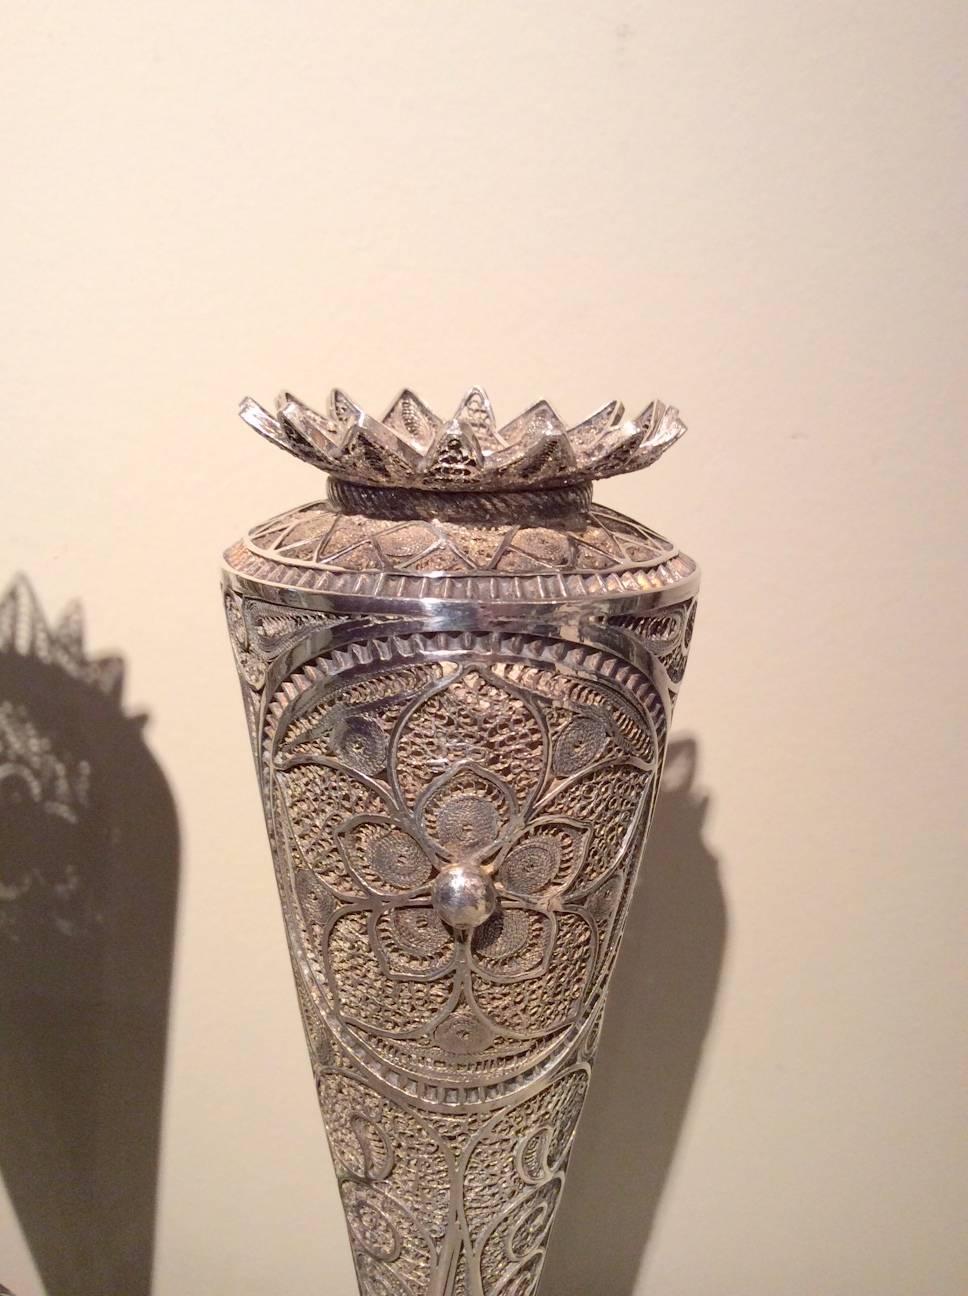 Persian Silver Candlesticks Decorated in Silver Filigree, Early 19th Century